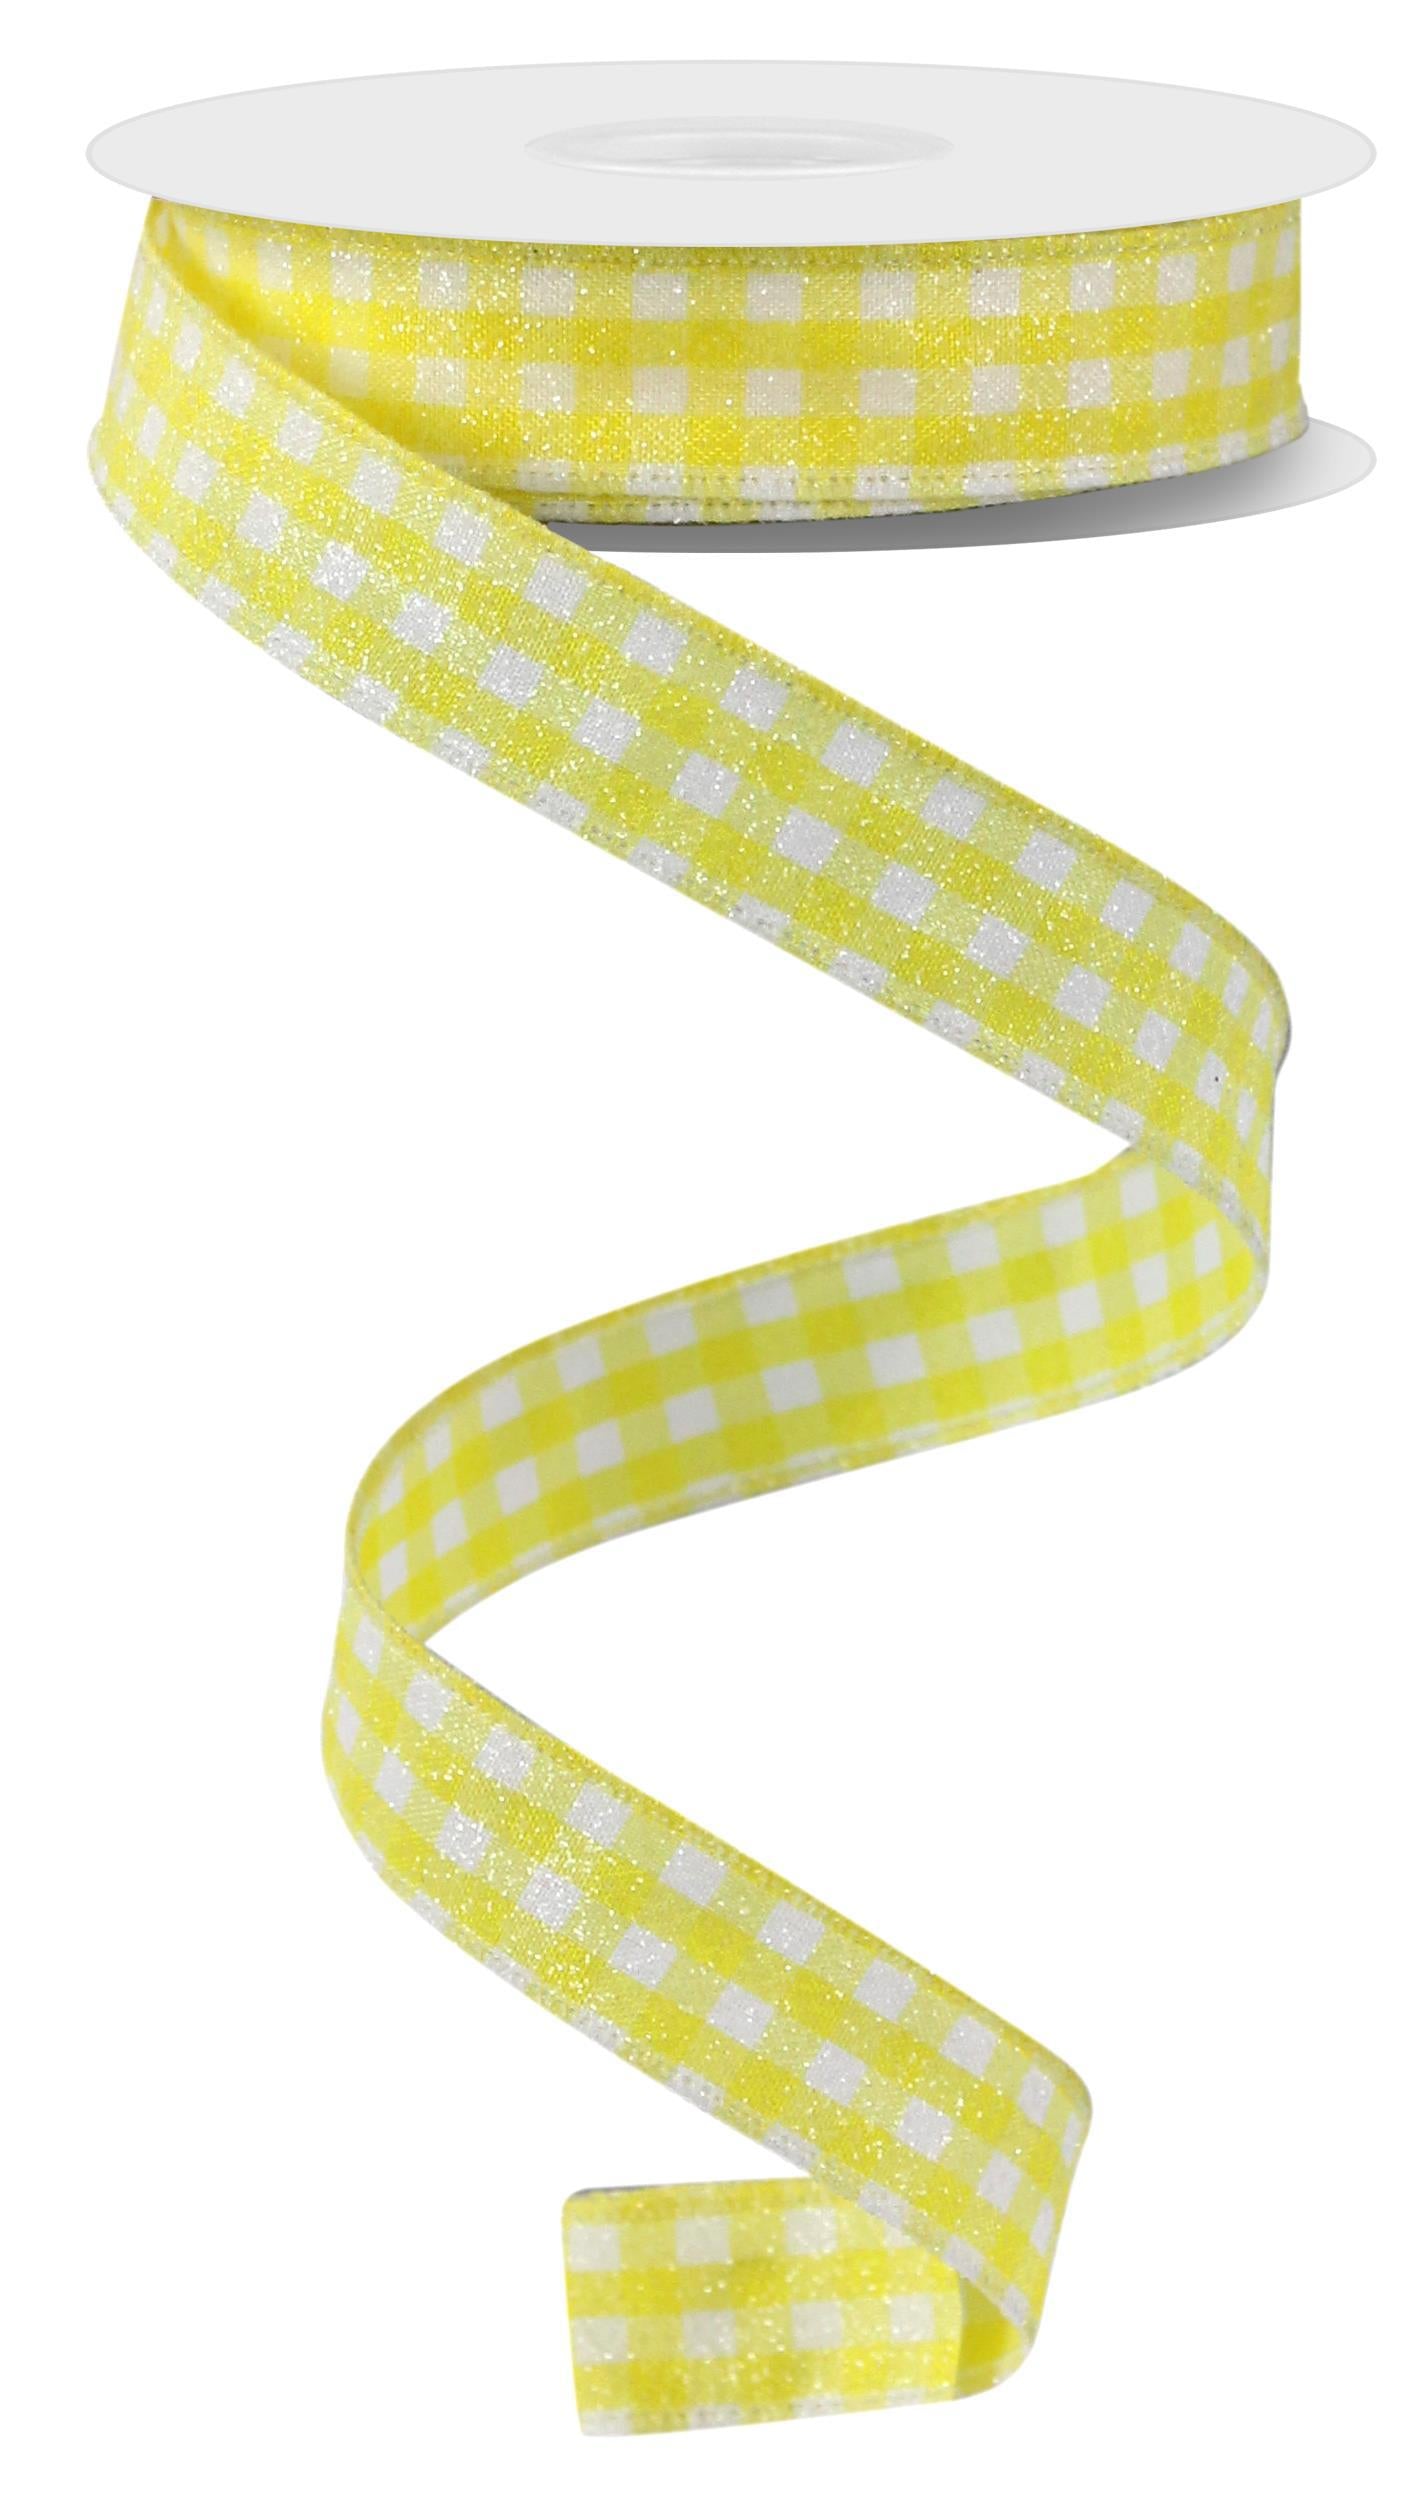 Wired Ribbon * Glitter Gingham Check * Yellow and White Canvas * 5/8" x 10 Yards * RGE12629